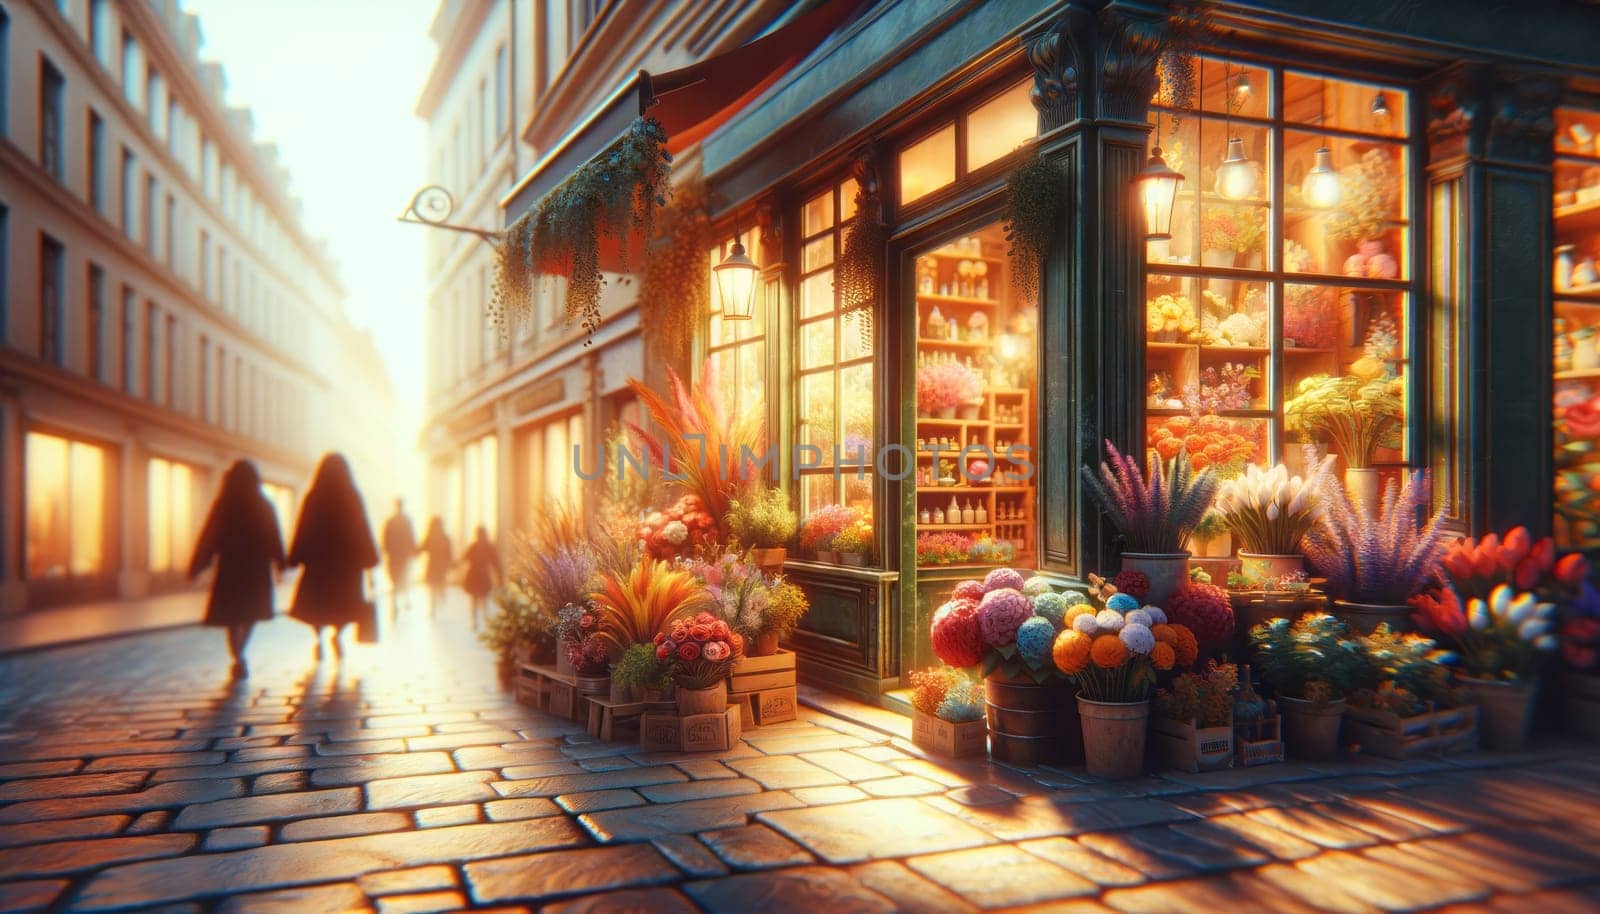 A wide digital illustration of a cozy street scene with a flower shop. The shop is filled with an abundance of flowers in various colors, displayed in vases and containers, giving a vibrant and inviting look. The warm lighting from the shop spills out onto the sidewalk, where people are walking by, blurred to give a sense of motion and life. The focus is on the flower shop, creating a picturesque and romantic atmosphere typical of a quaint European city. The soft, golden hour light bathes the scene, enhancing the warm and tranquil mood of the setting.